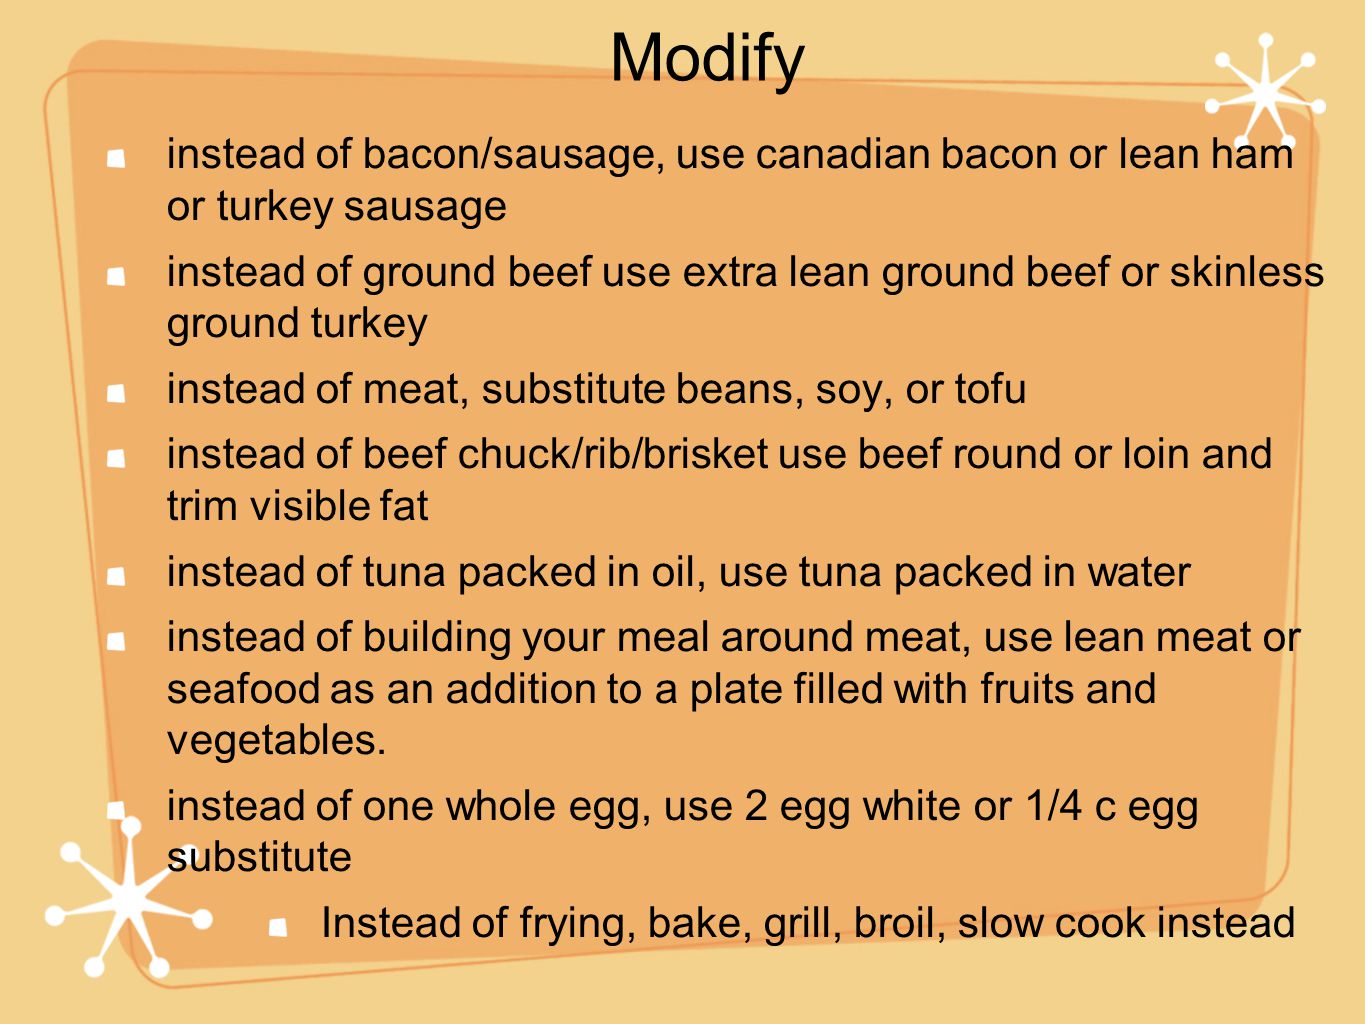 instead of bacon/sausage, use canadian bacon or lean ham or turkey sausage instead of ground beef use extra lean ground beef or skinless ground turkey instead of meat, substitute beans, soy, or tofu instead of beef chuck/rib/brisket use beef round or loin and trim visible fat instead of tuna packed in oil, use tuna packed in water instead of building your meal around meat, use lean meat or seafood as an addition to a plate filled with fruits and vegetables.